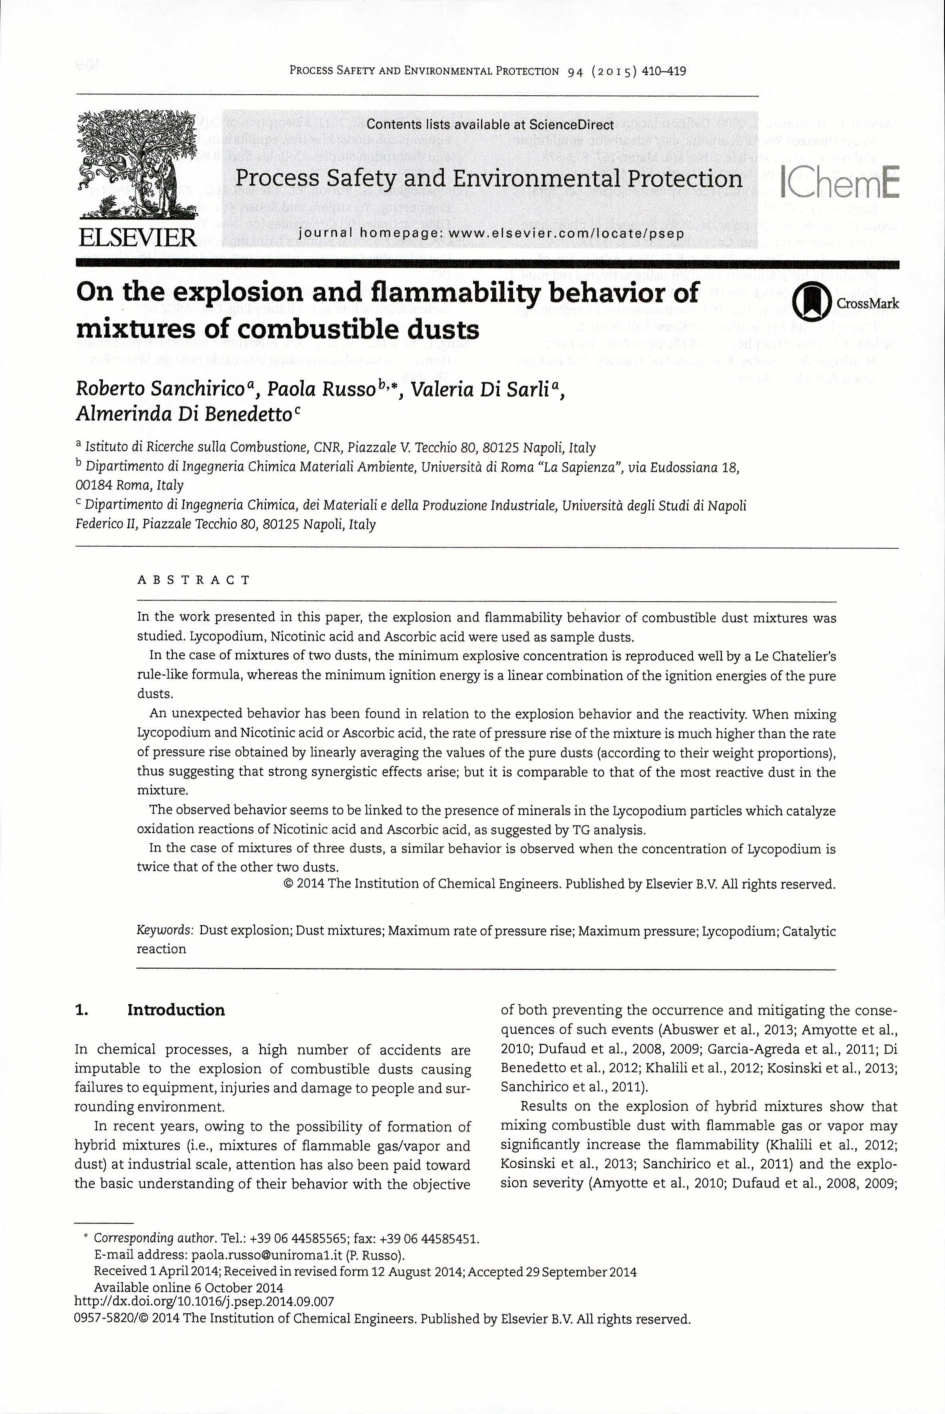 On the explosion and flammability behavior of mixtures of combustible dusts